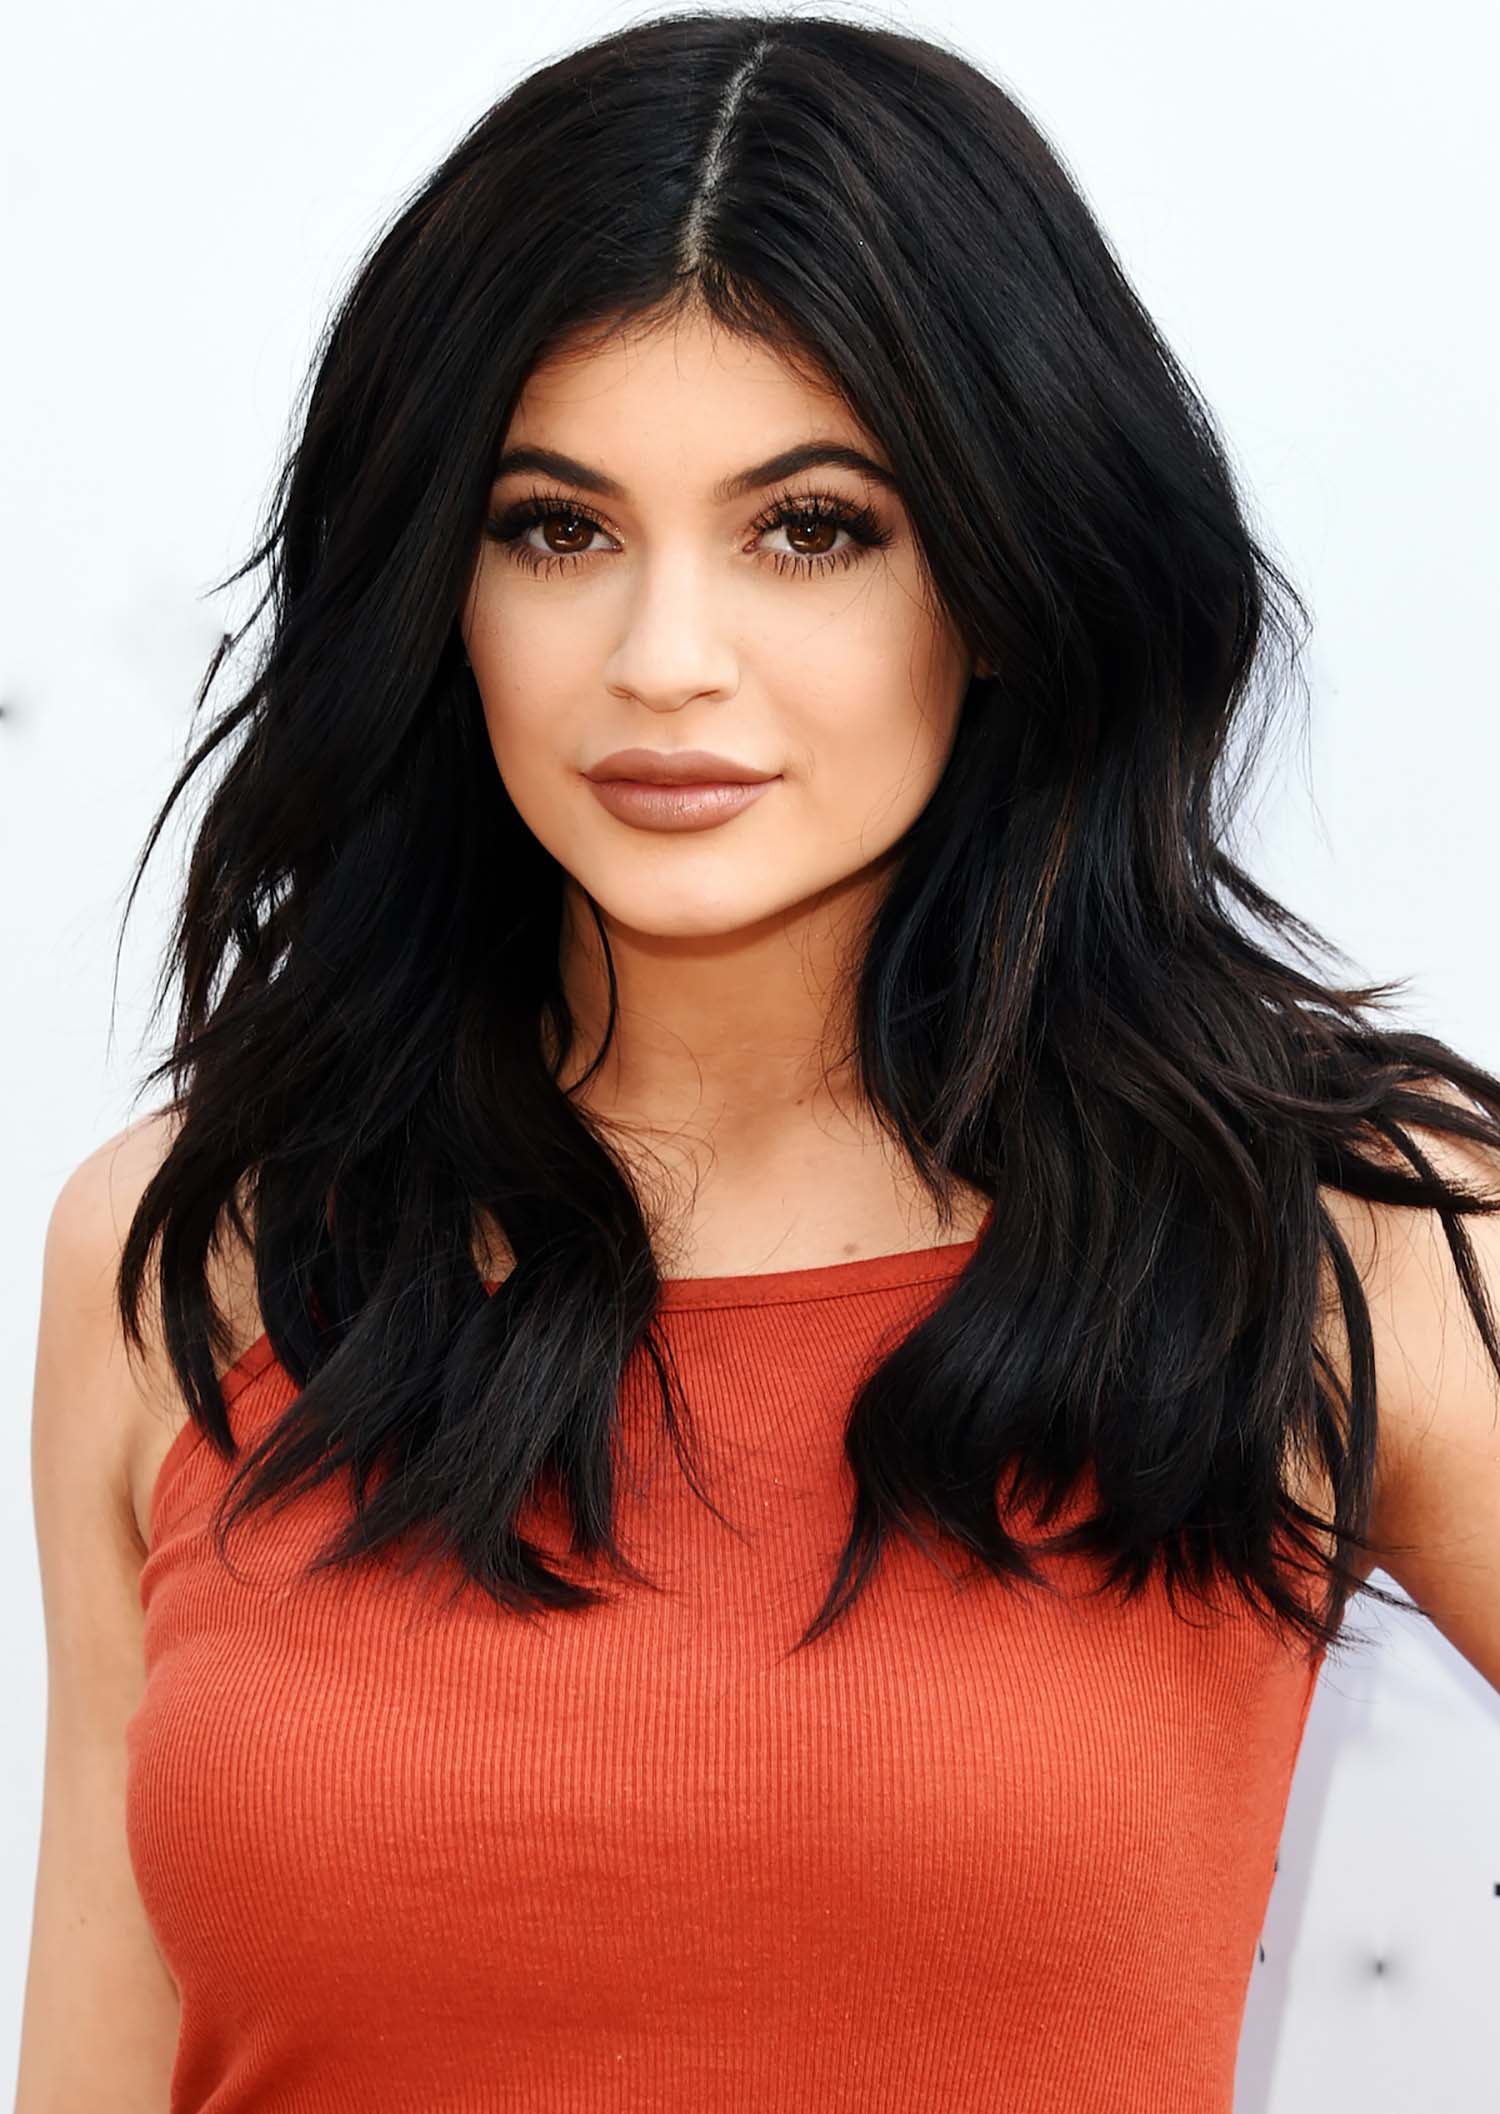 Kylie Jenner Hottest Picture Full HD 1080p